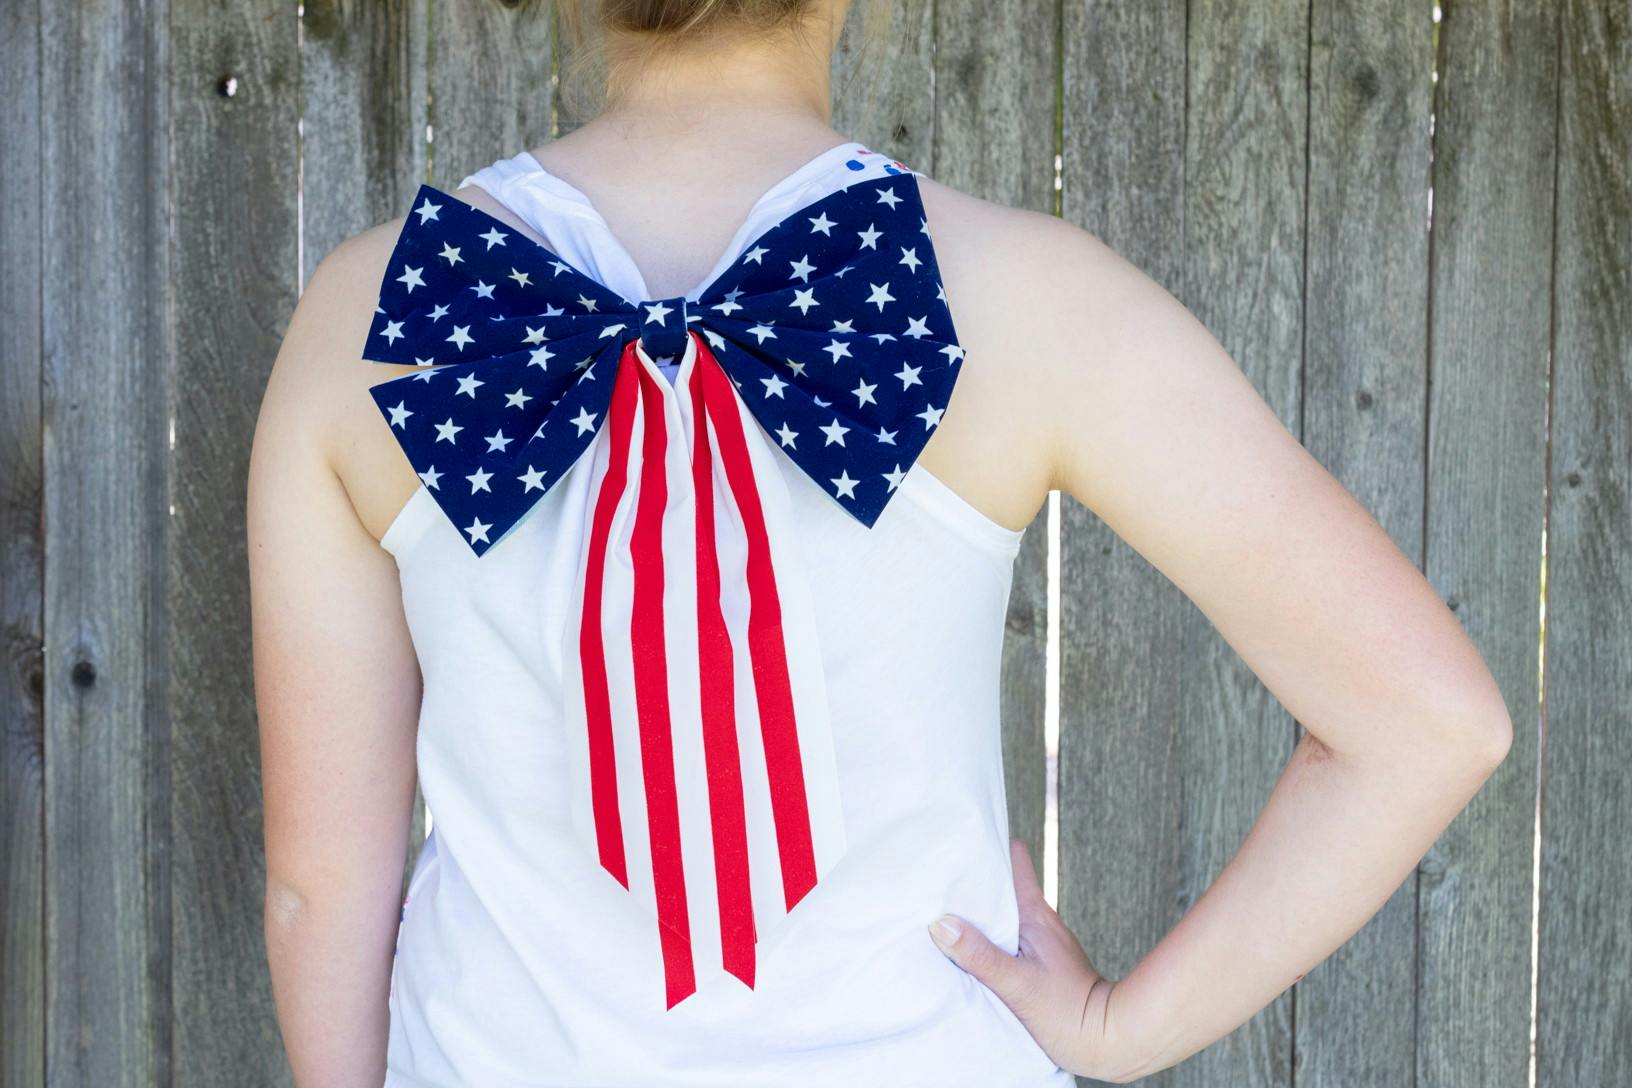 6 Ways to Bling Out Your $5 Old Navy Shirt for the 4th of July - The Krazy  Coupon Lady